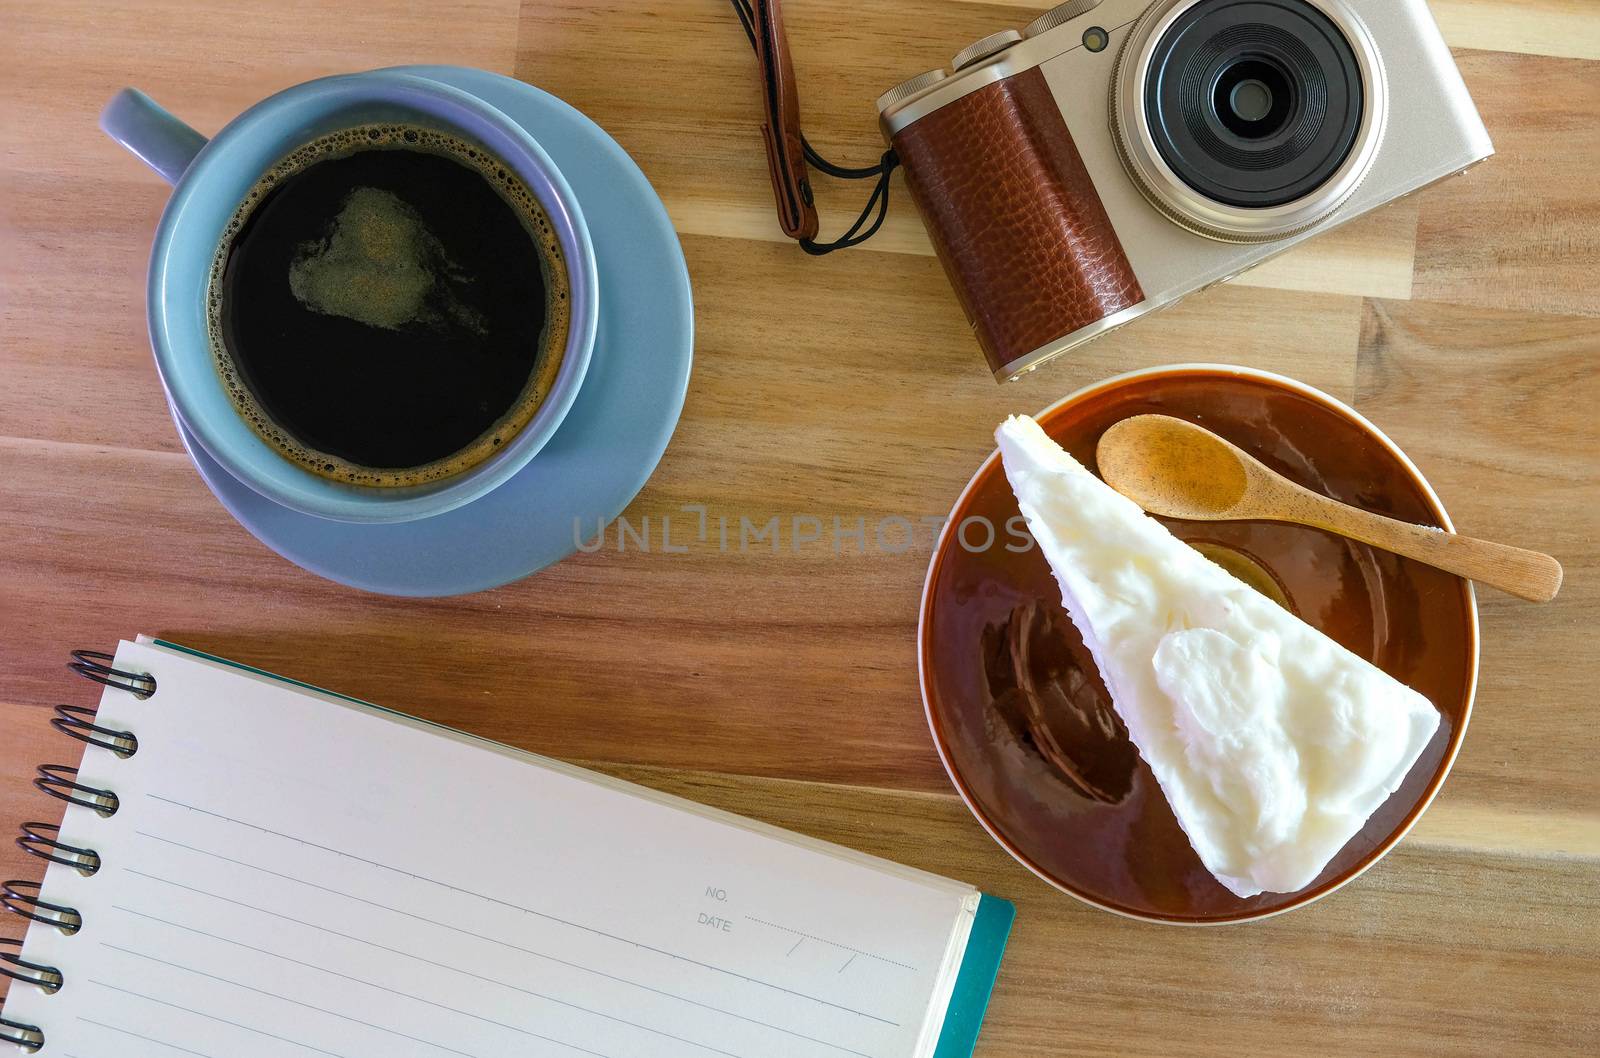 The notebook, camera, coffee, coconut cake on wooden background